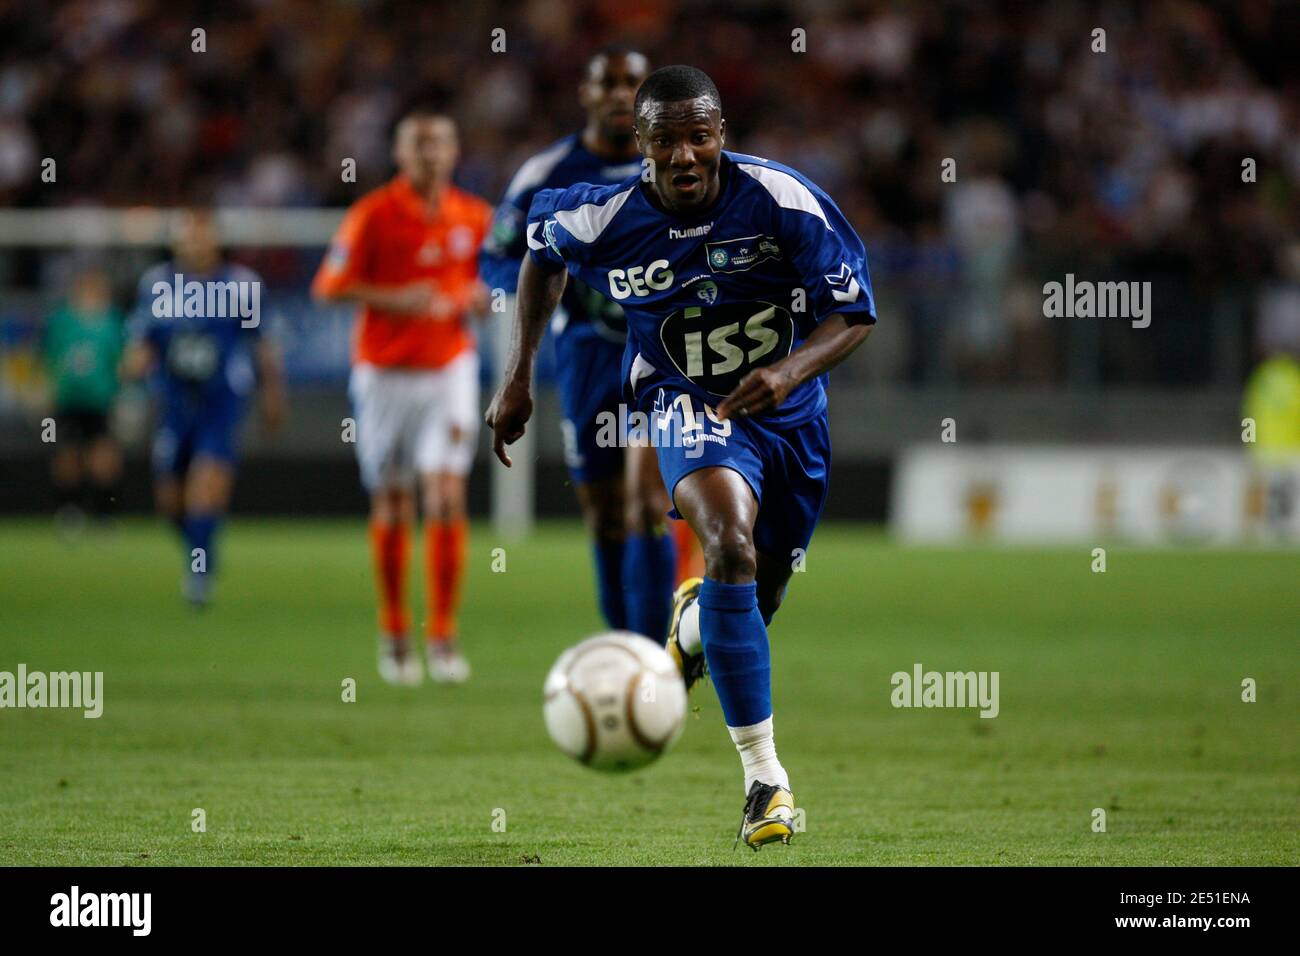 Grenoble's Franck Dja Djedje during the French Second League Soccer match  match Grenoble vs Chateauroux in Grenoble, France on May 12, 2008. The match  endend in a 0 to 0 draw and